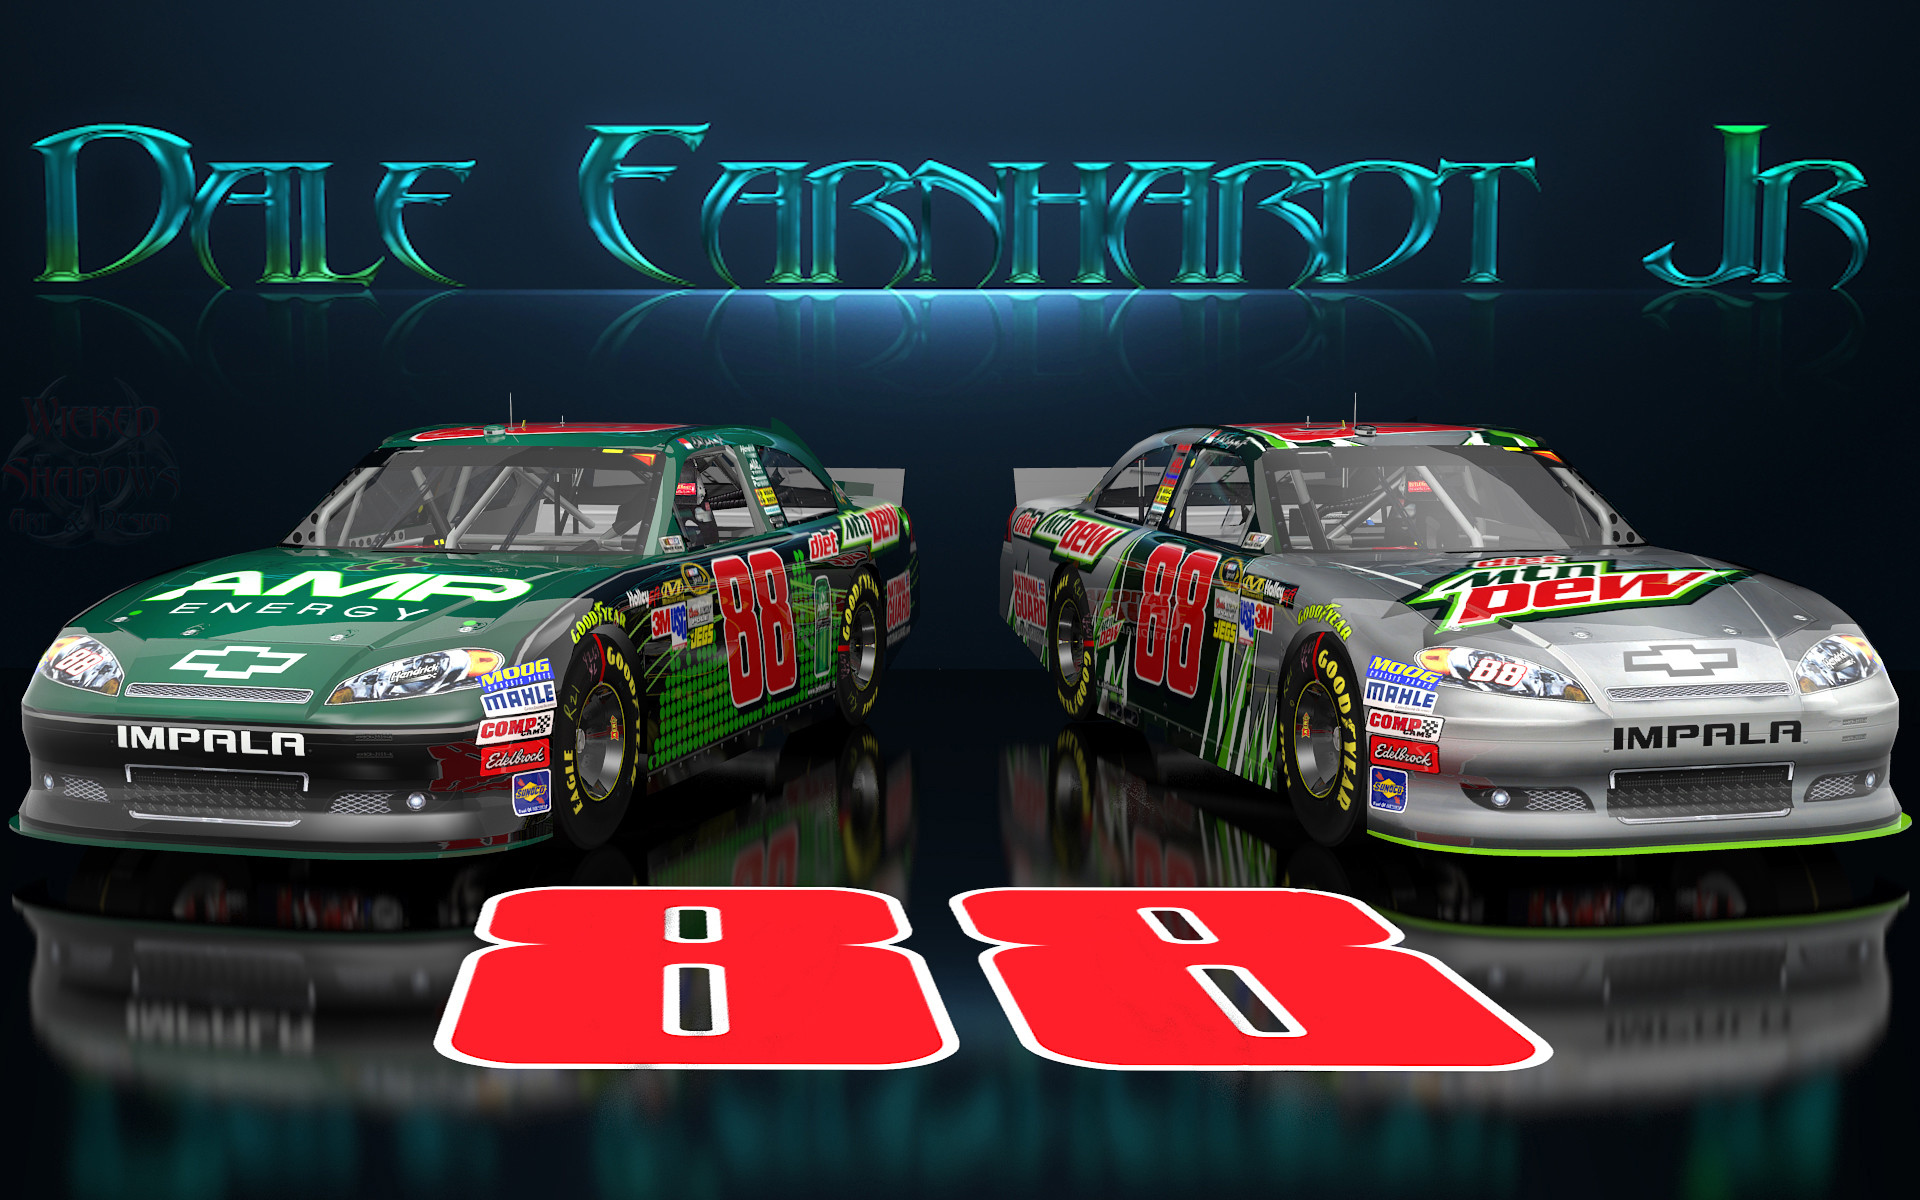 1920x1200 Dale Earnhardt Jr images Dale Earnhardt Jr Wicked Text Amp Diet Dew  Wallpaper 16x10 HD wallpaper and background photos